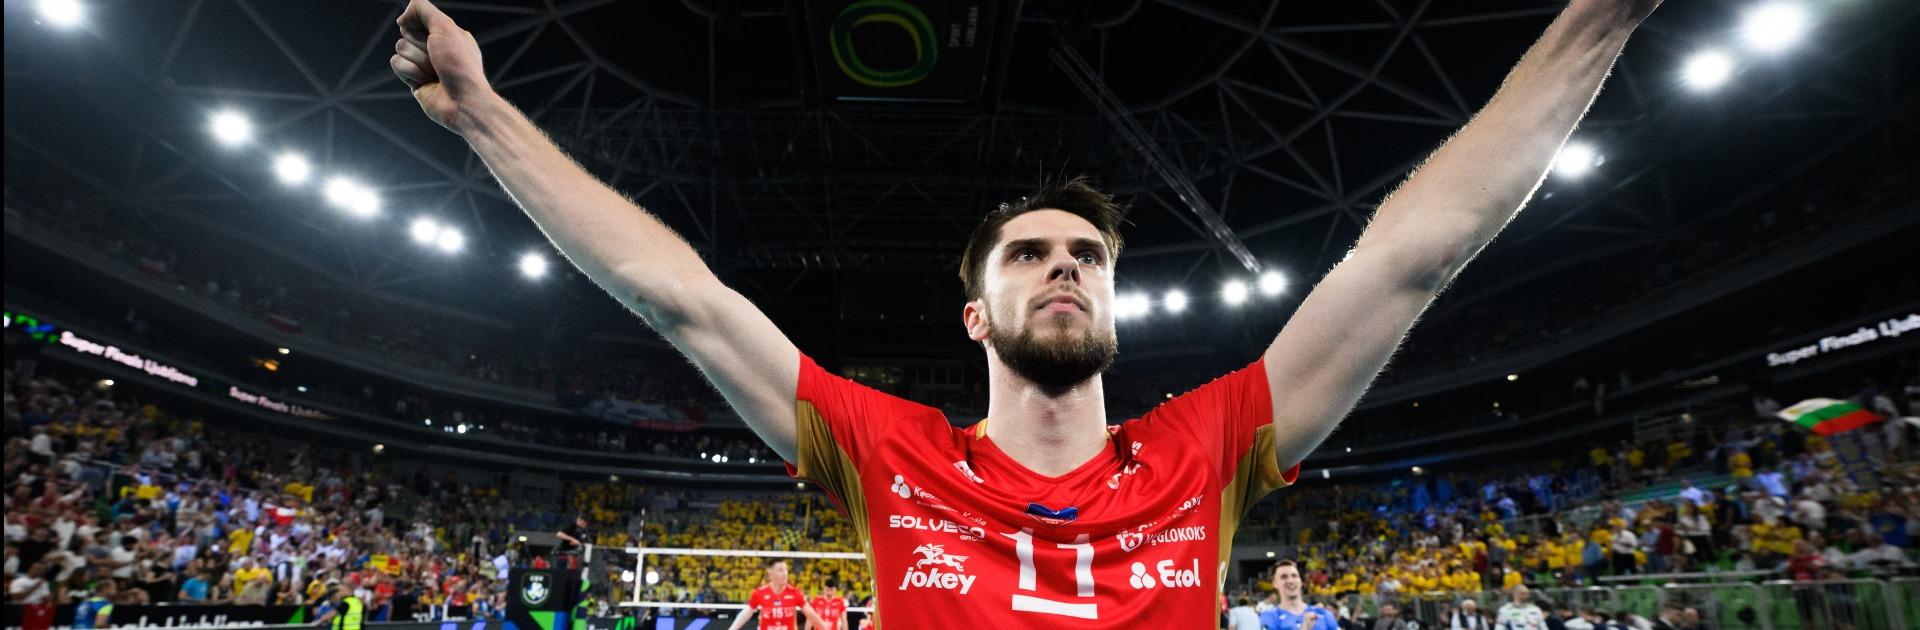 CEV Eurovolley Qualifiers Men LIVE and On Demand